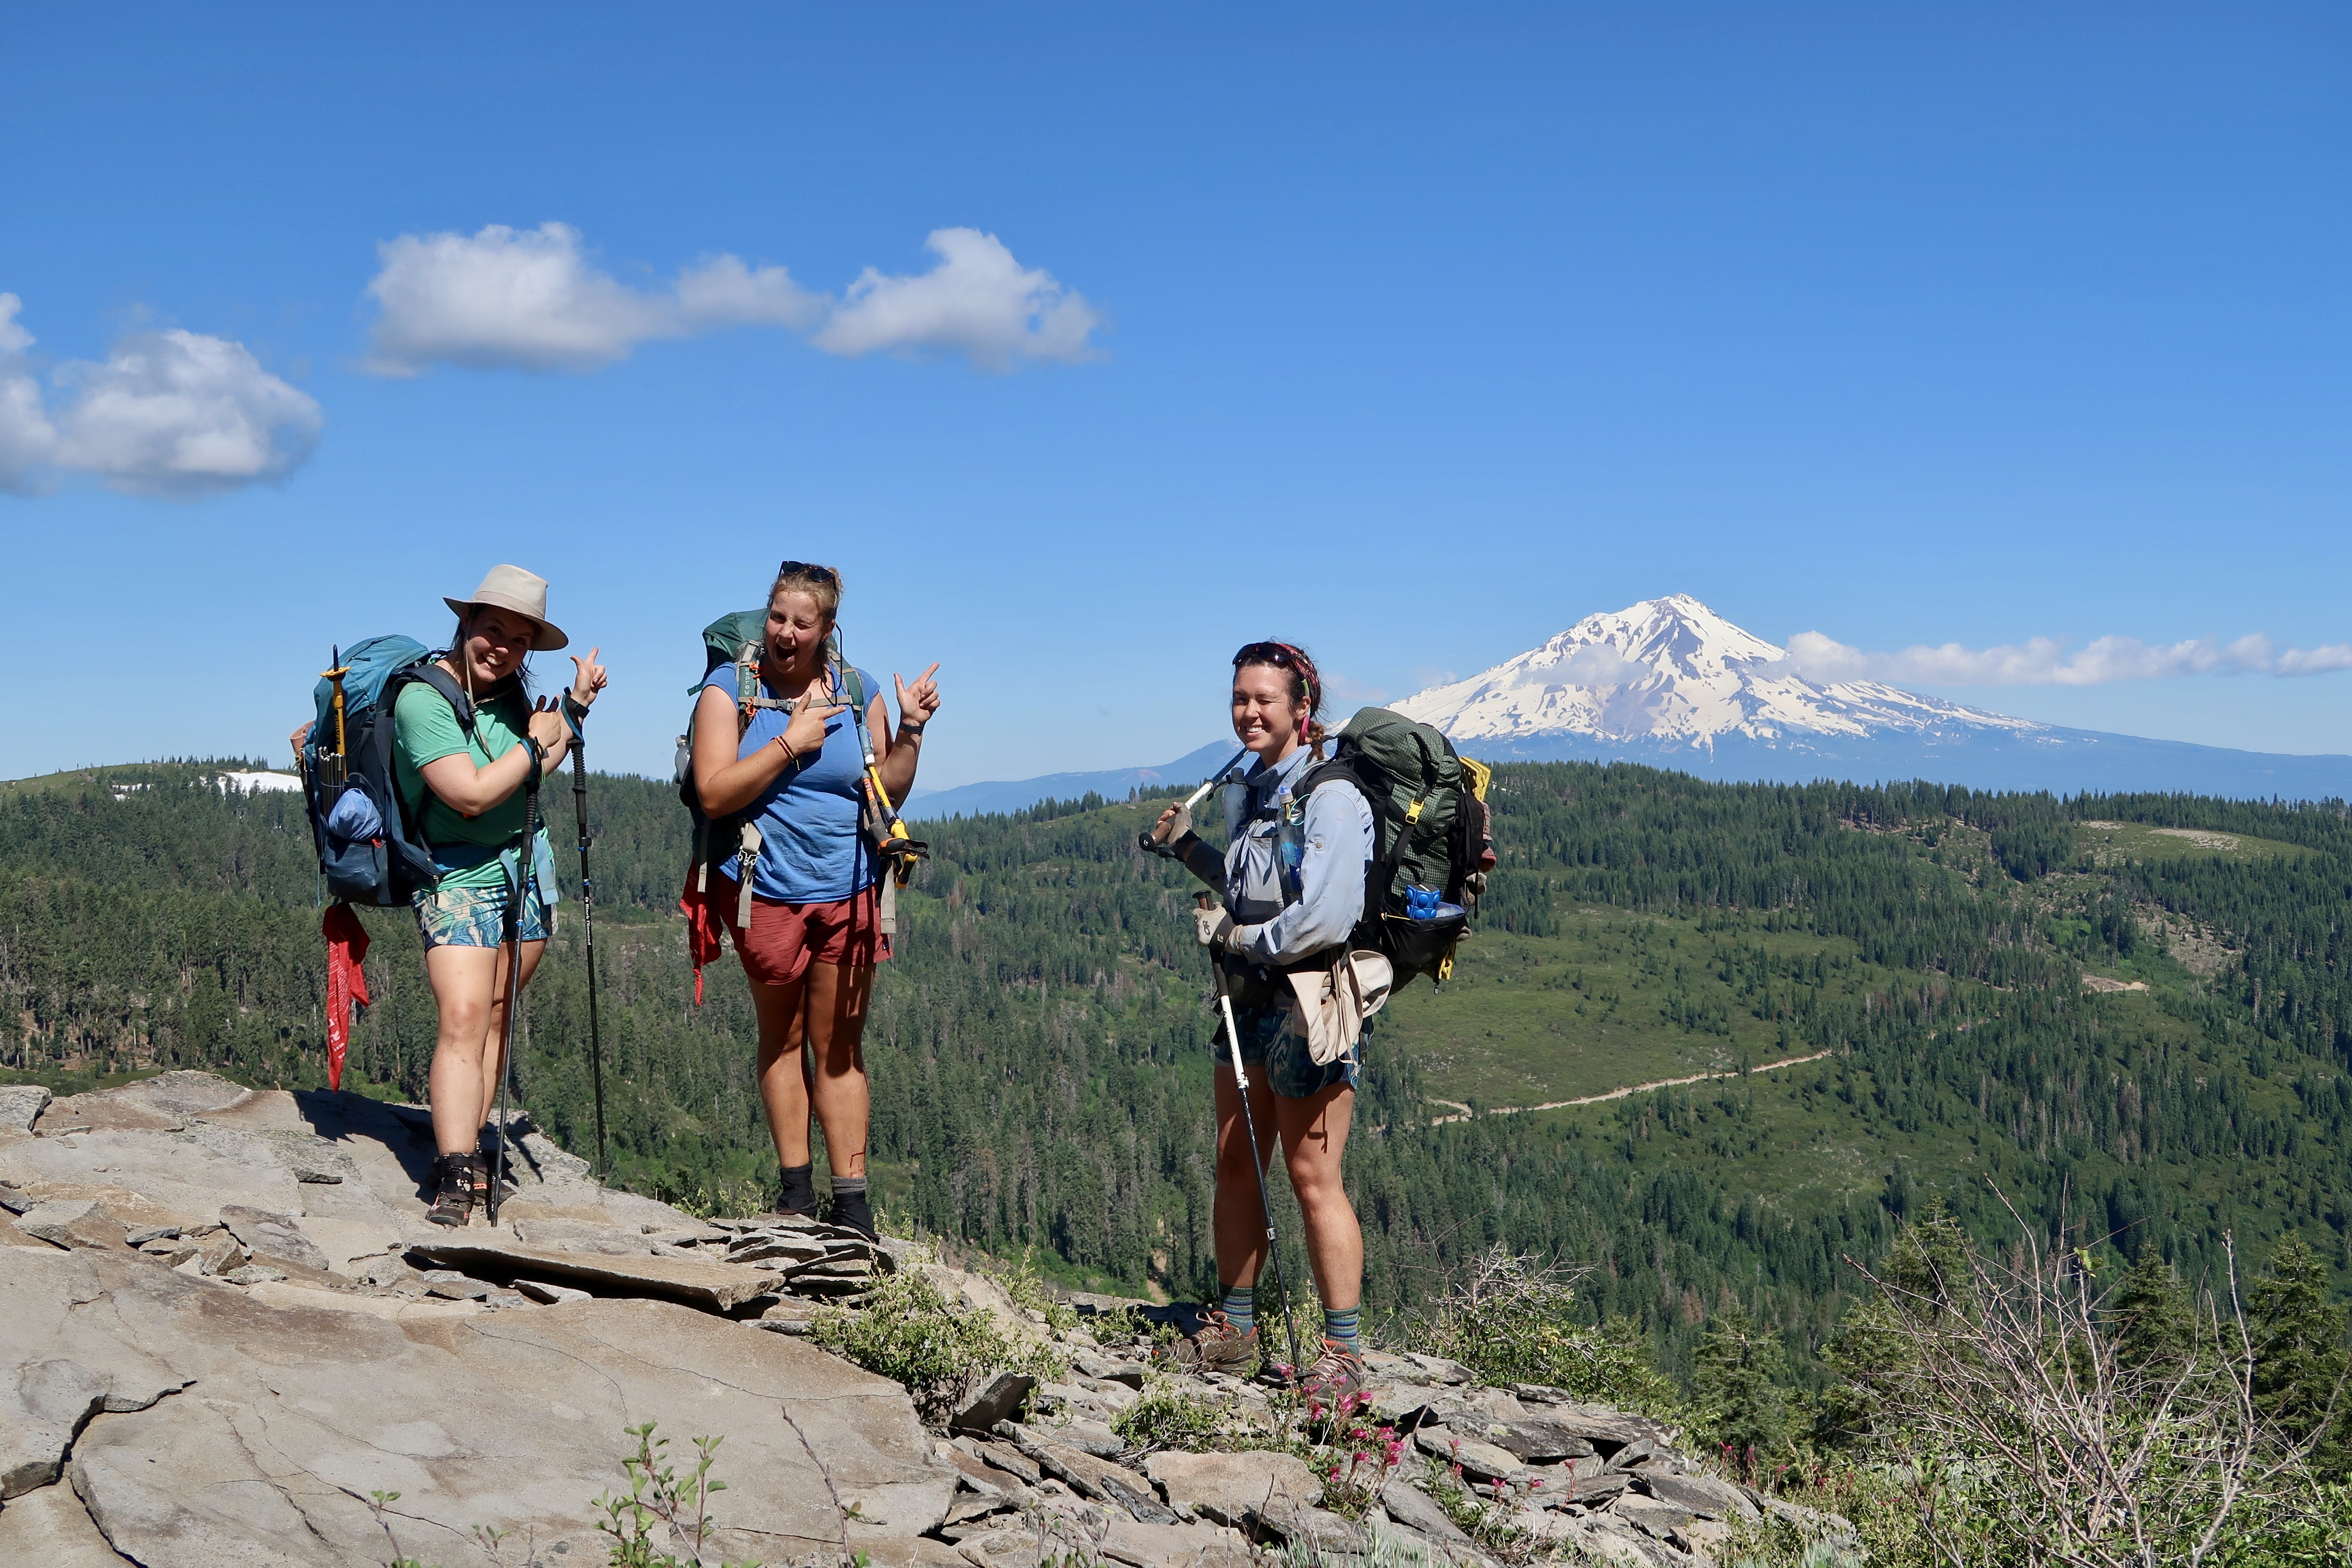 PCT Day 76 – Spectacular Views of Mt. Shasta